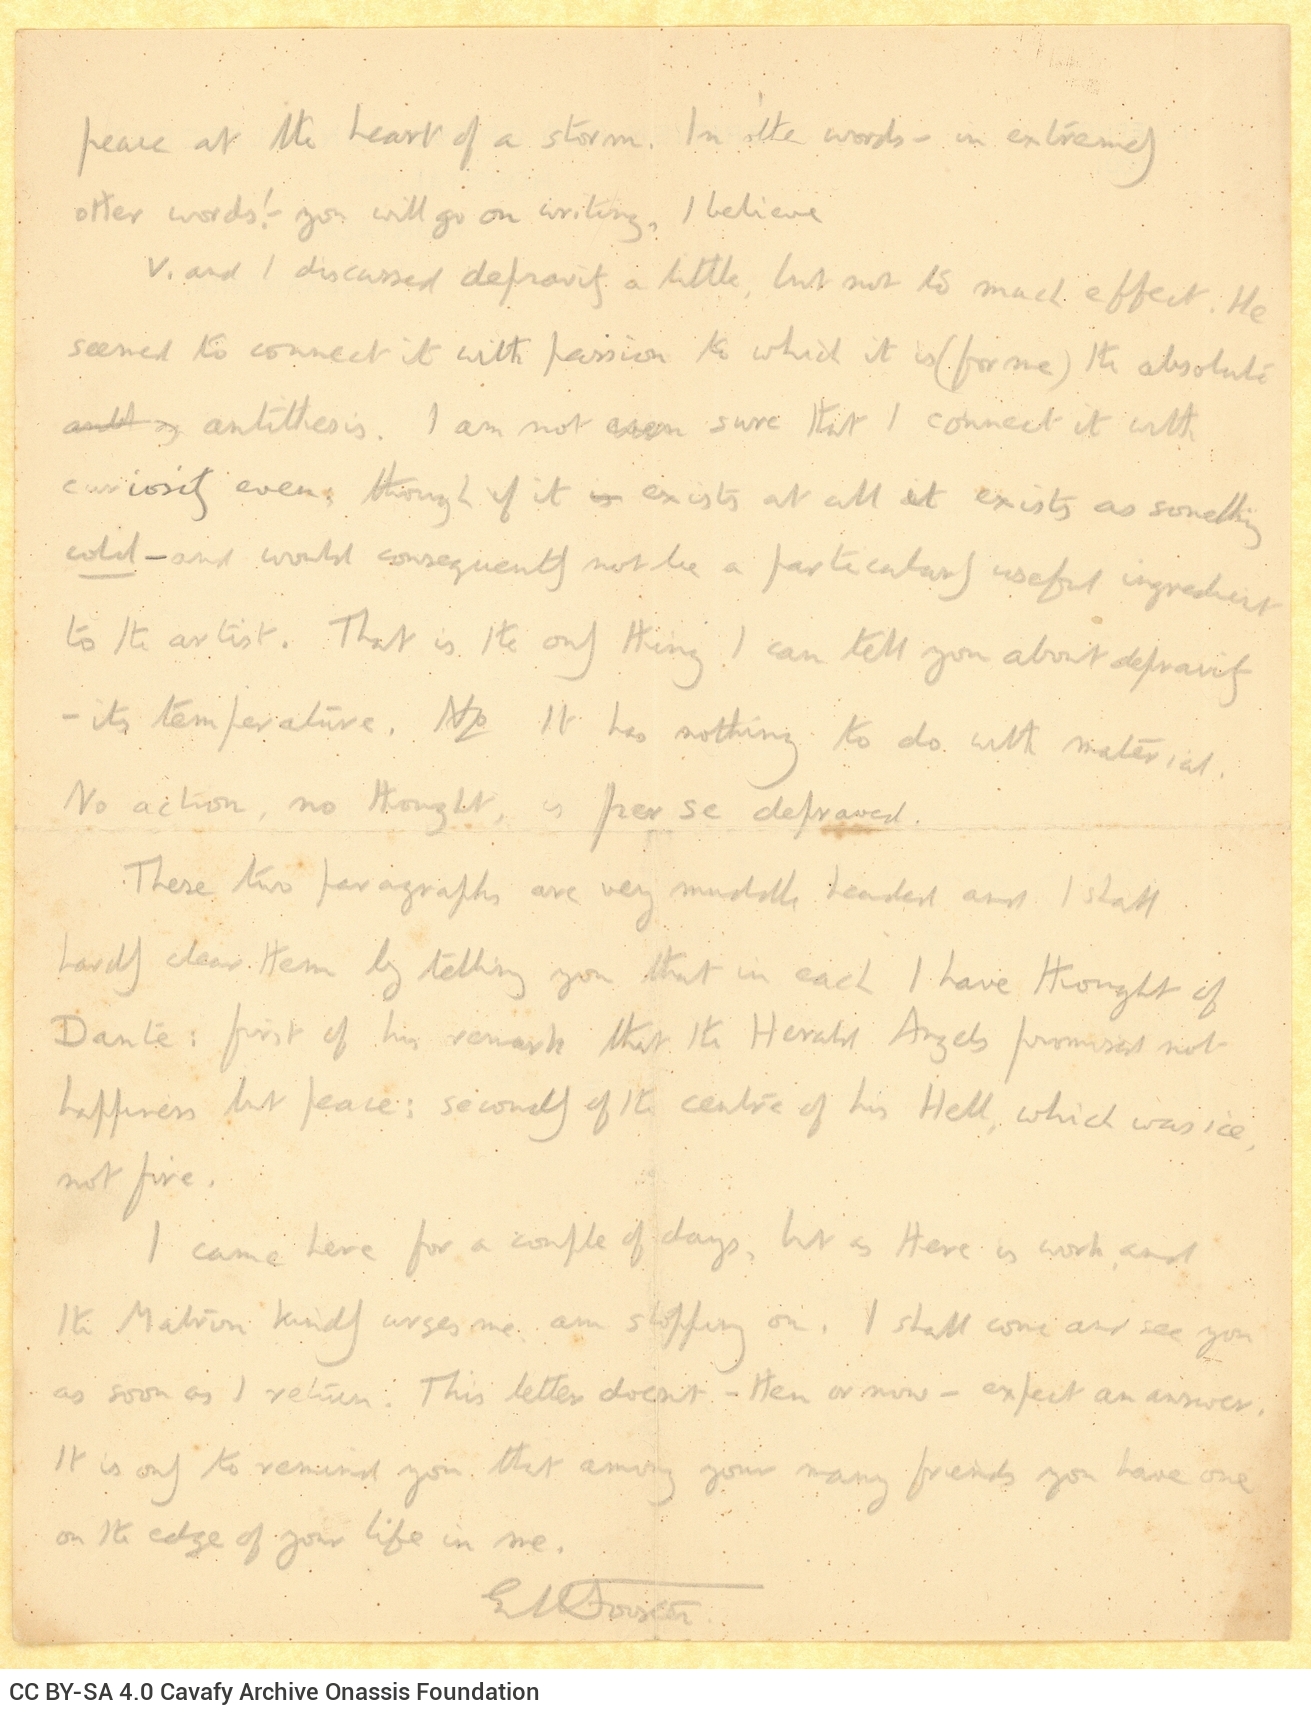 Handwritten letter by E. M. Forster to Cavafy on both sides of a letterheaded paper of the British Red Cross Convalescent Hos